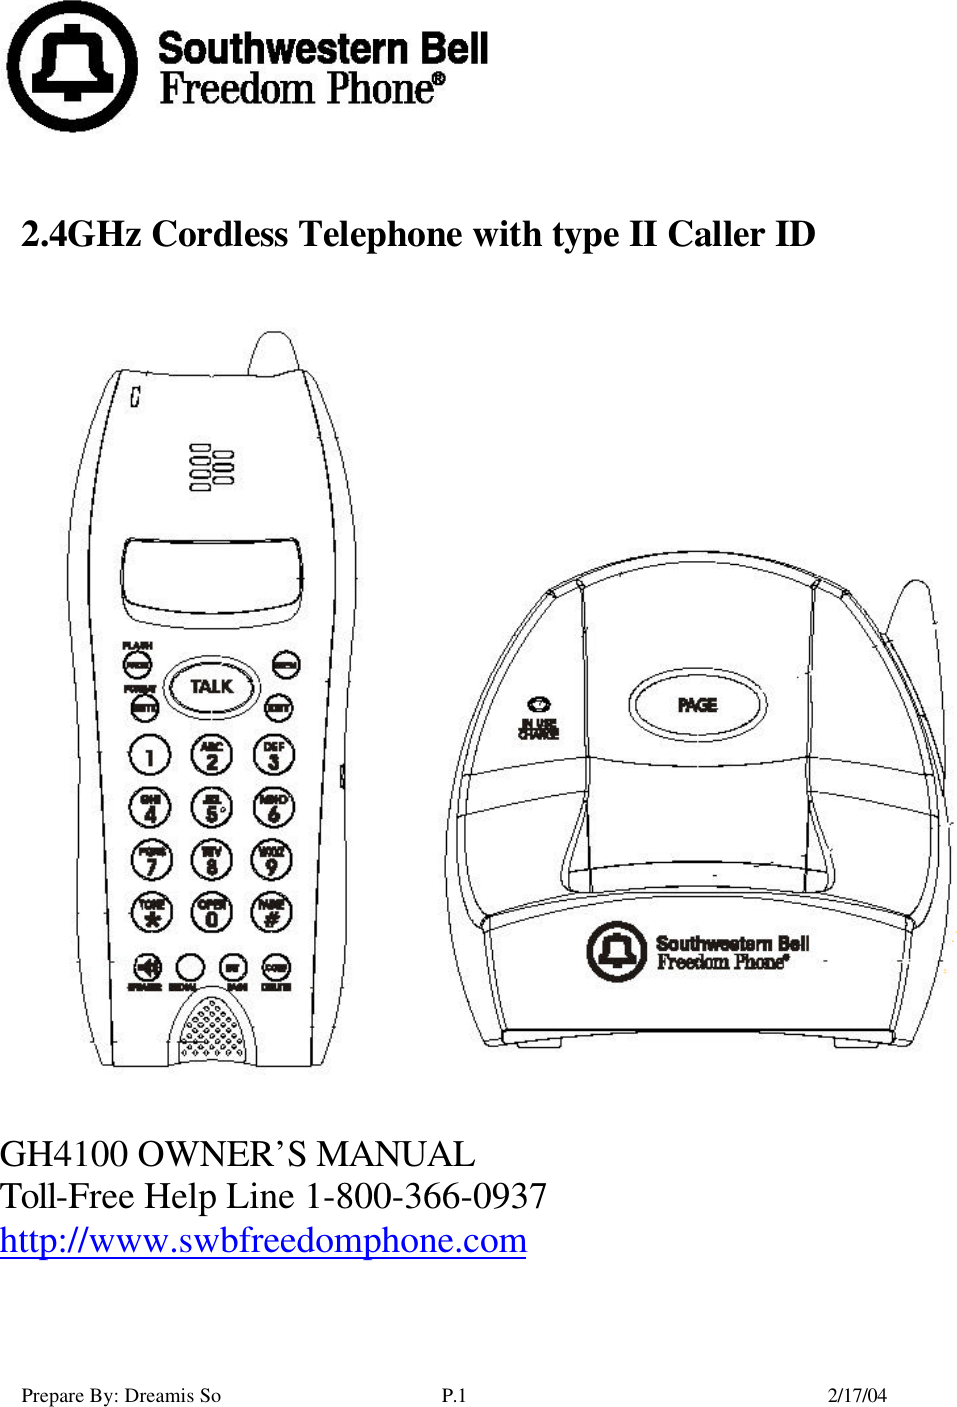 Prepare By: Dreamis So P.1    2/17/04         2.4GHz Cordless Telephone with type II Caller ID    GH4100 OWNER’S MANUAL Toll-Free Help Line 1-800-366-0937 http://www.swbfreedomphone.com   